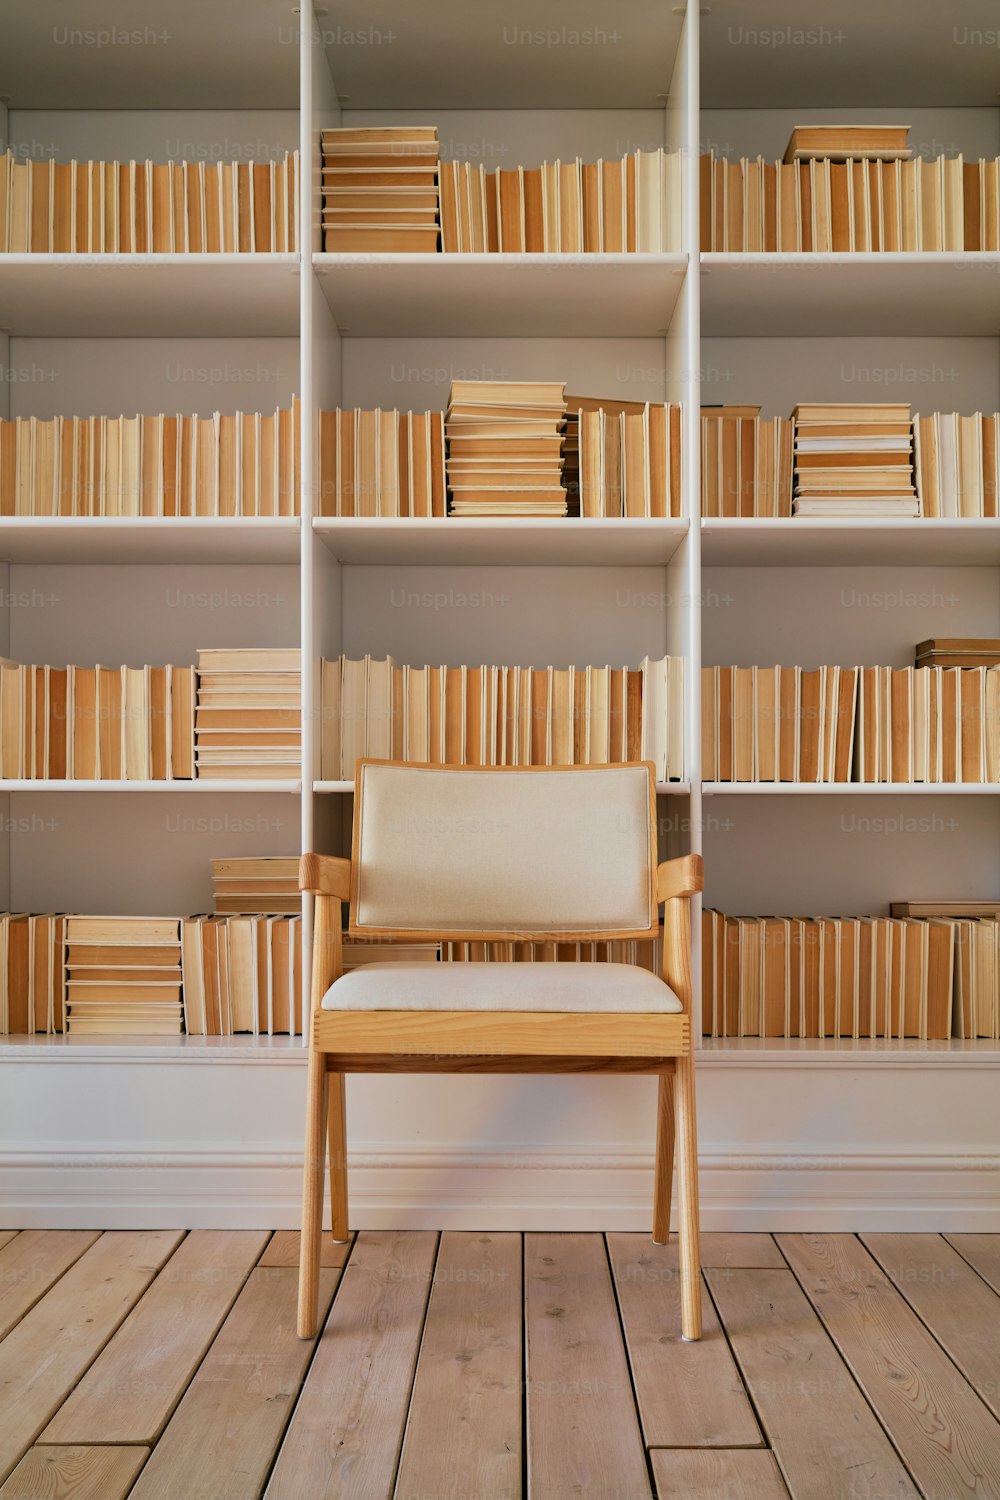 a chair sitting in front of a book shelf filled with books